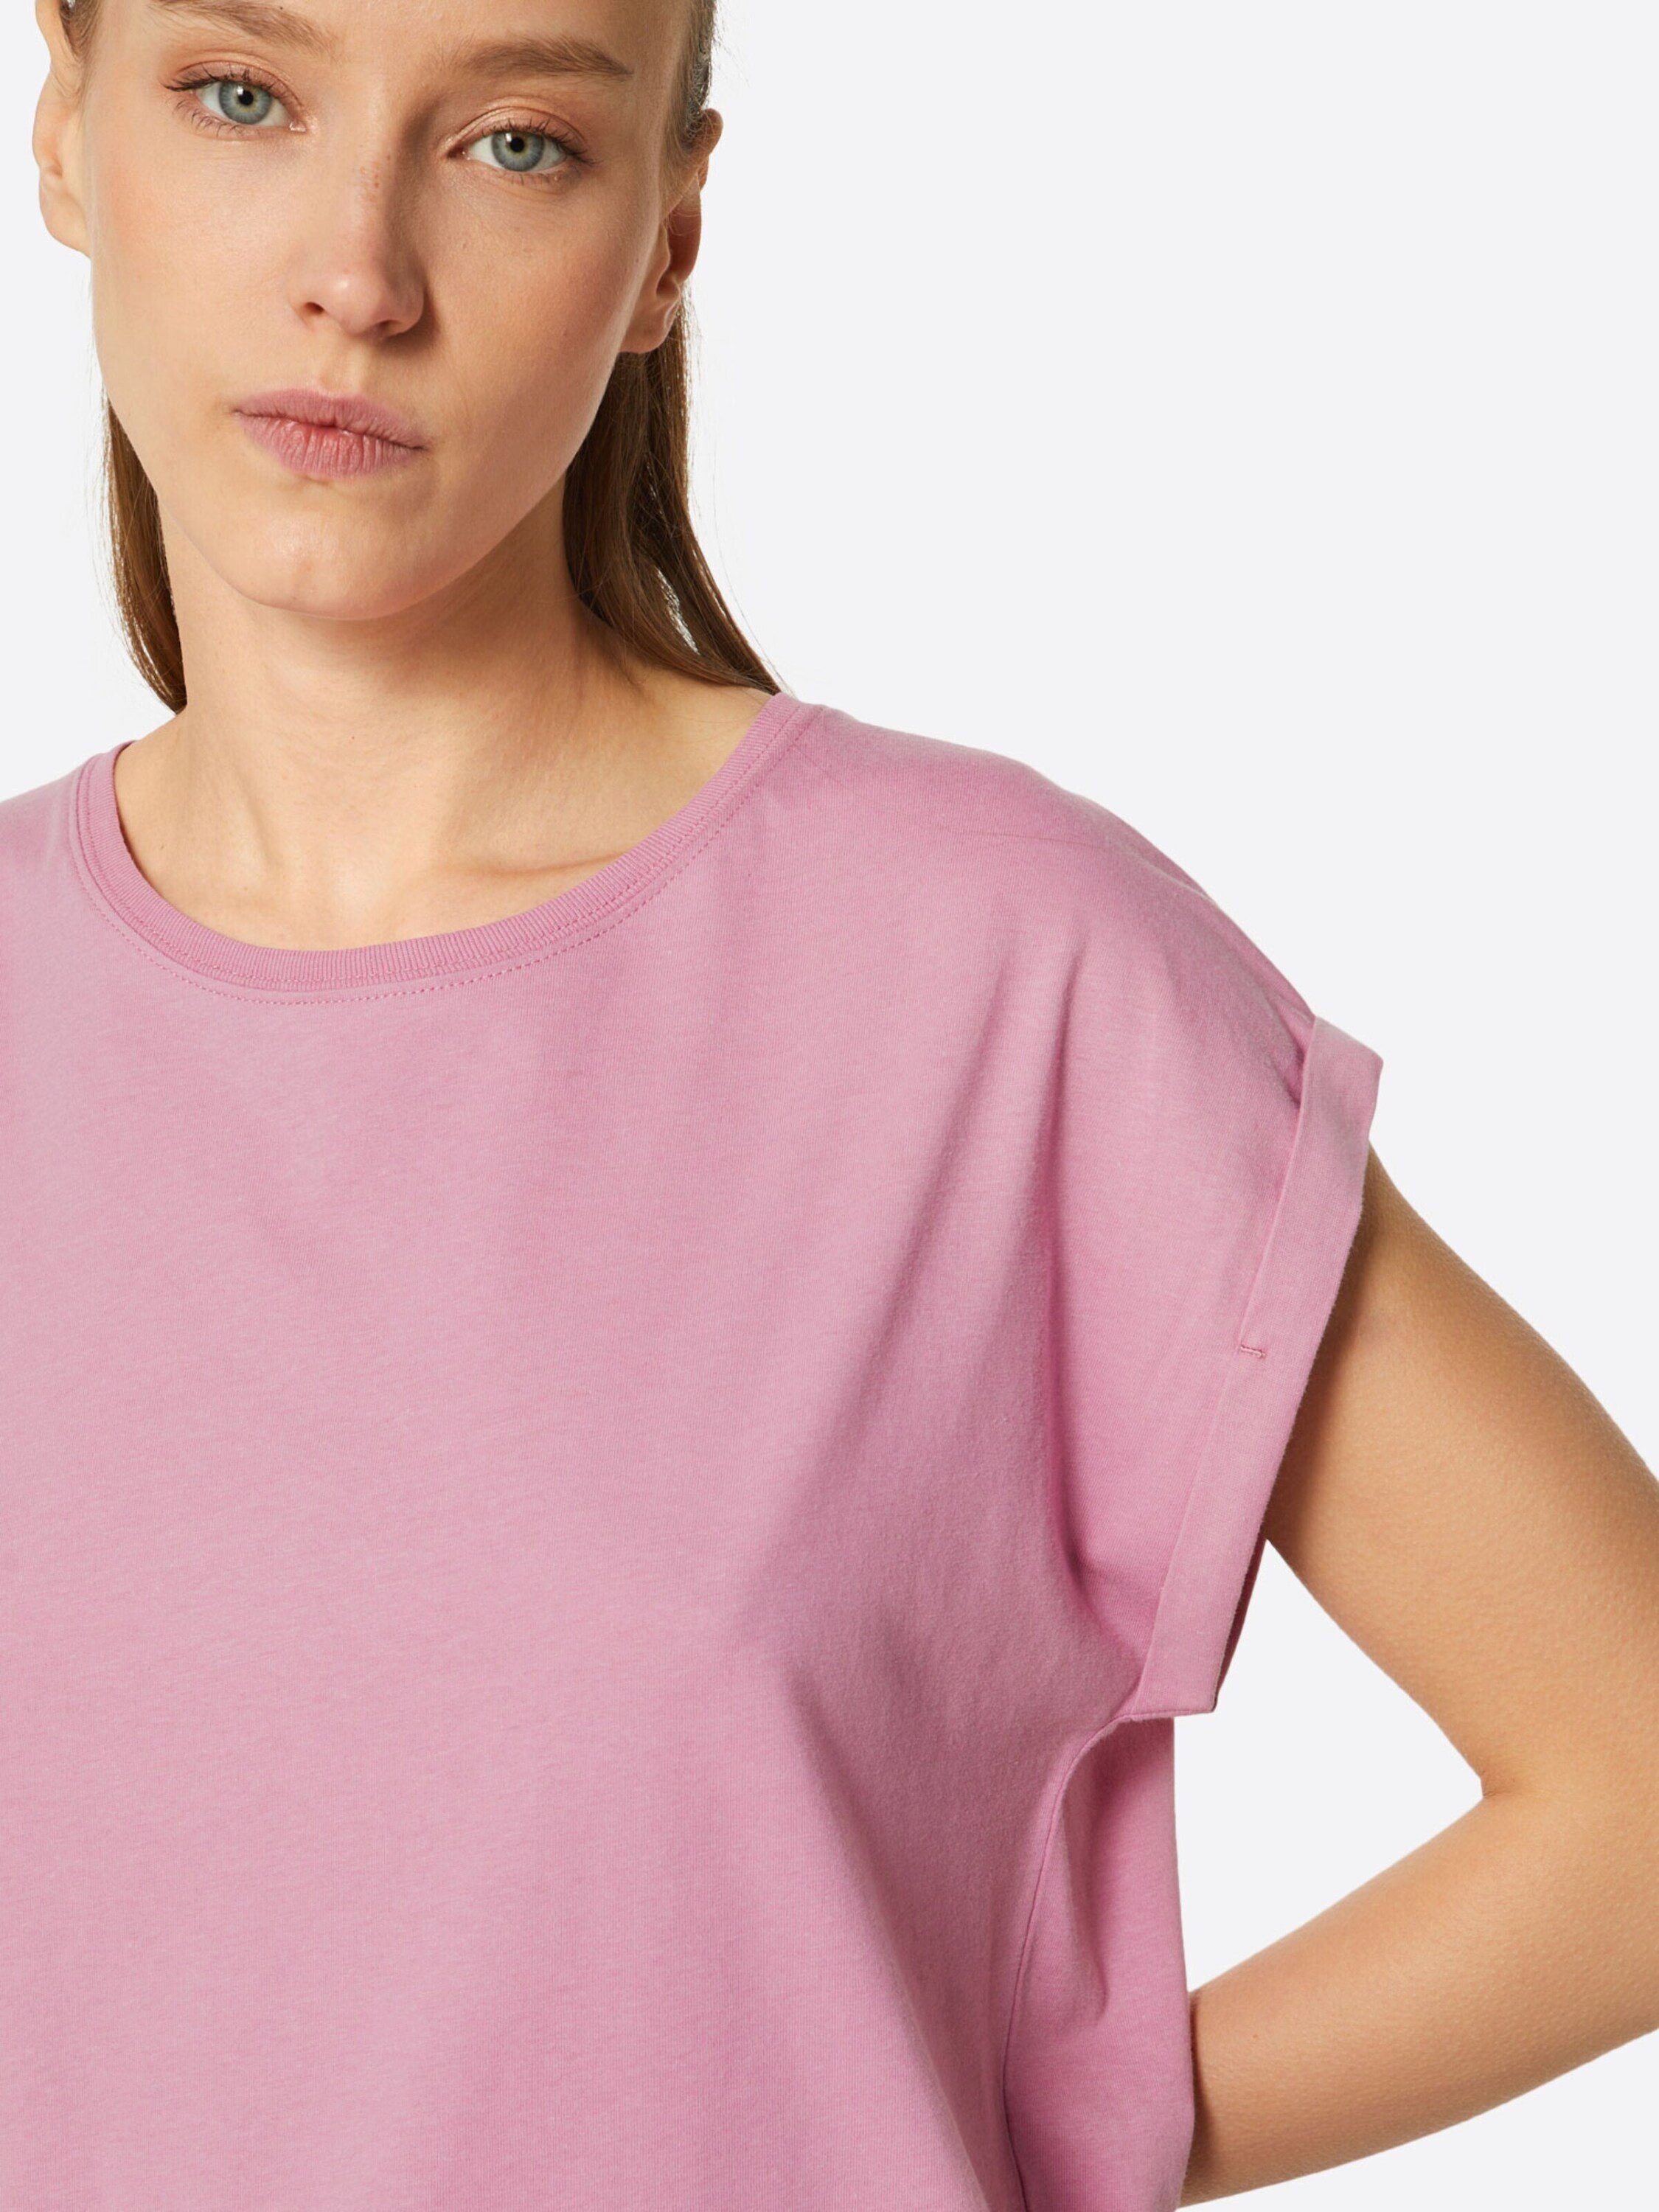 URBAN CLASSICS T-Shirt Extended coolpink Detail Shoulder (1-tlg) Weiteres TB771 Plain/ohne Details